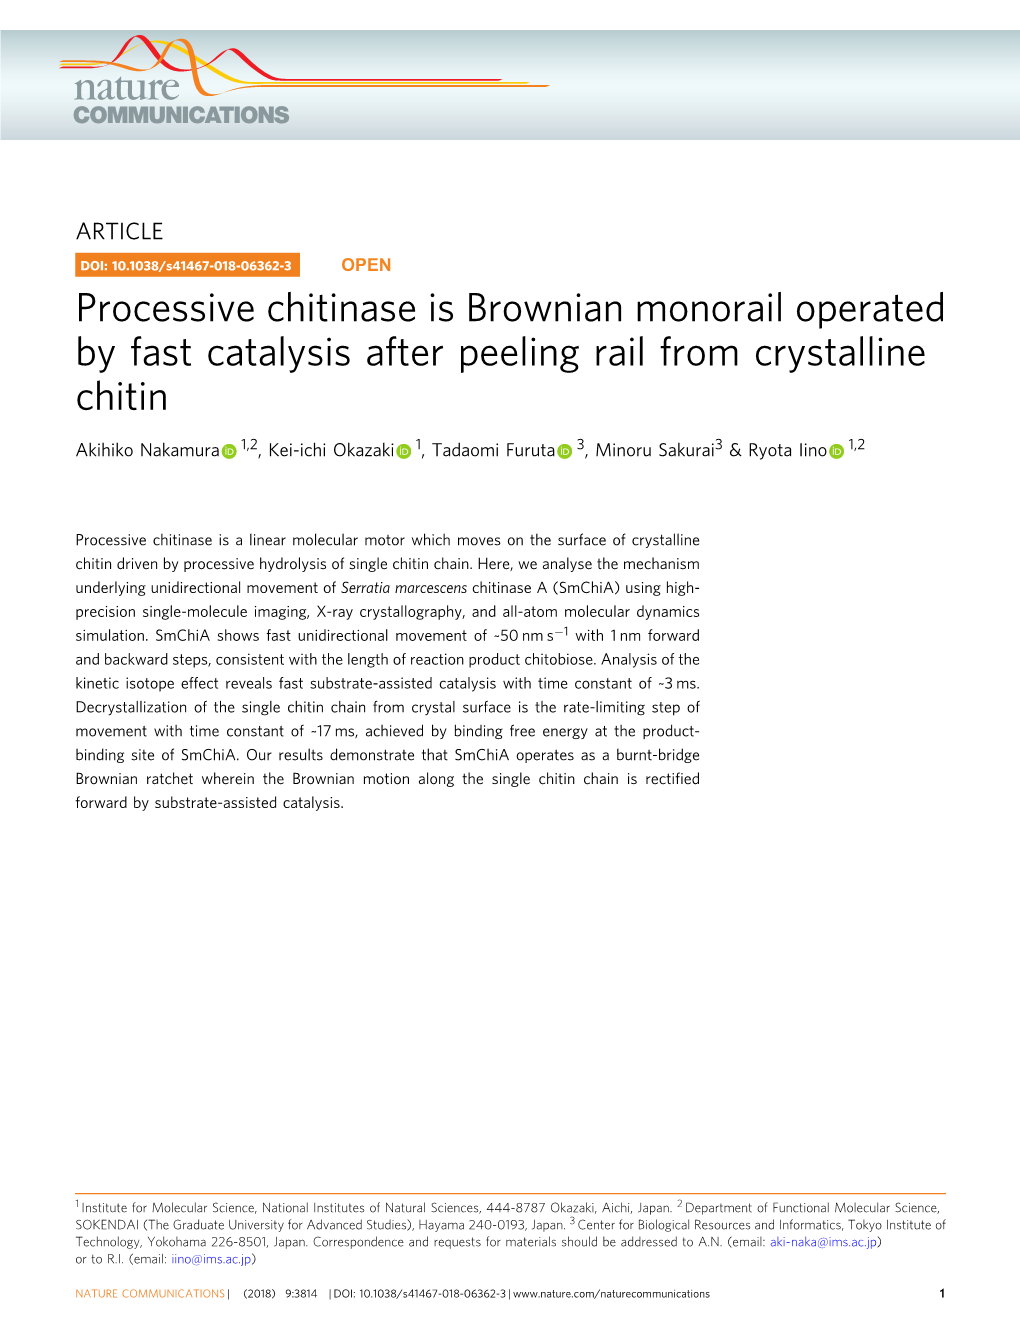 Processive Chitinase Is Brownian Monorail Operated by Fast Catalysis After Peeling Rail from Crystalline Chitin